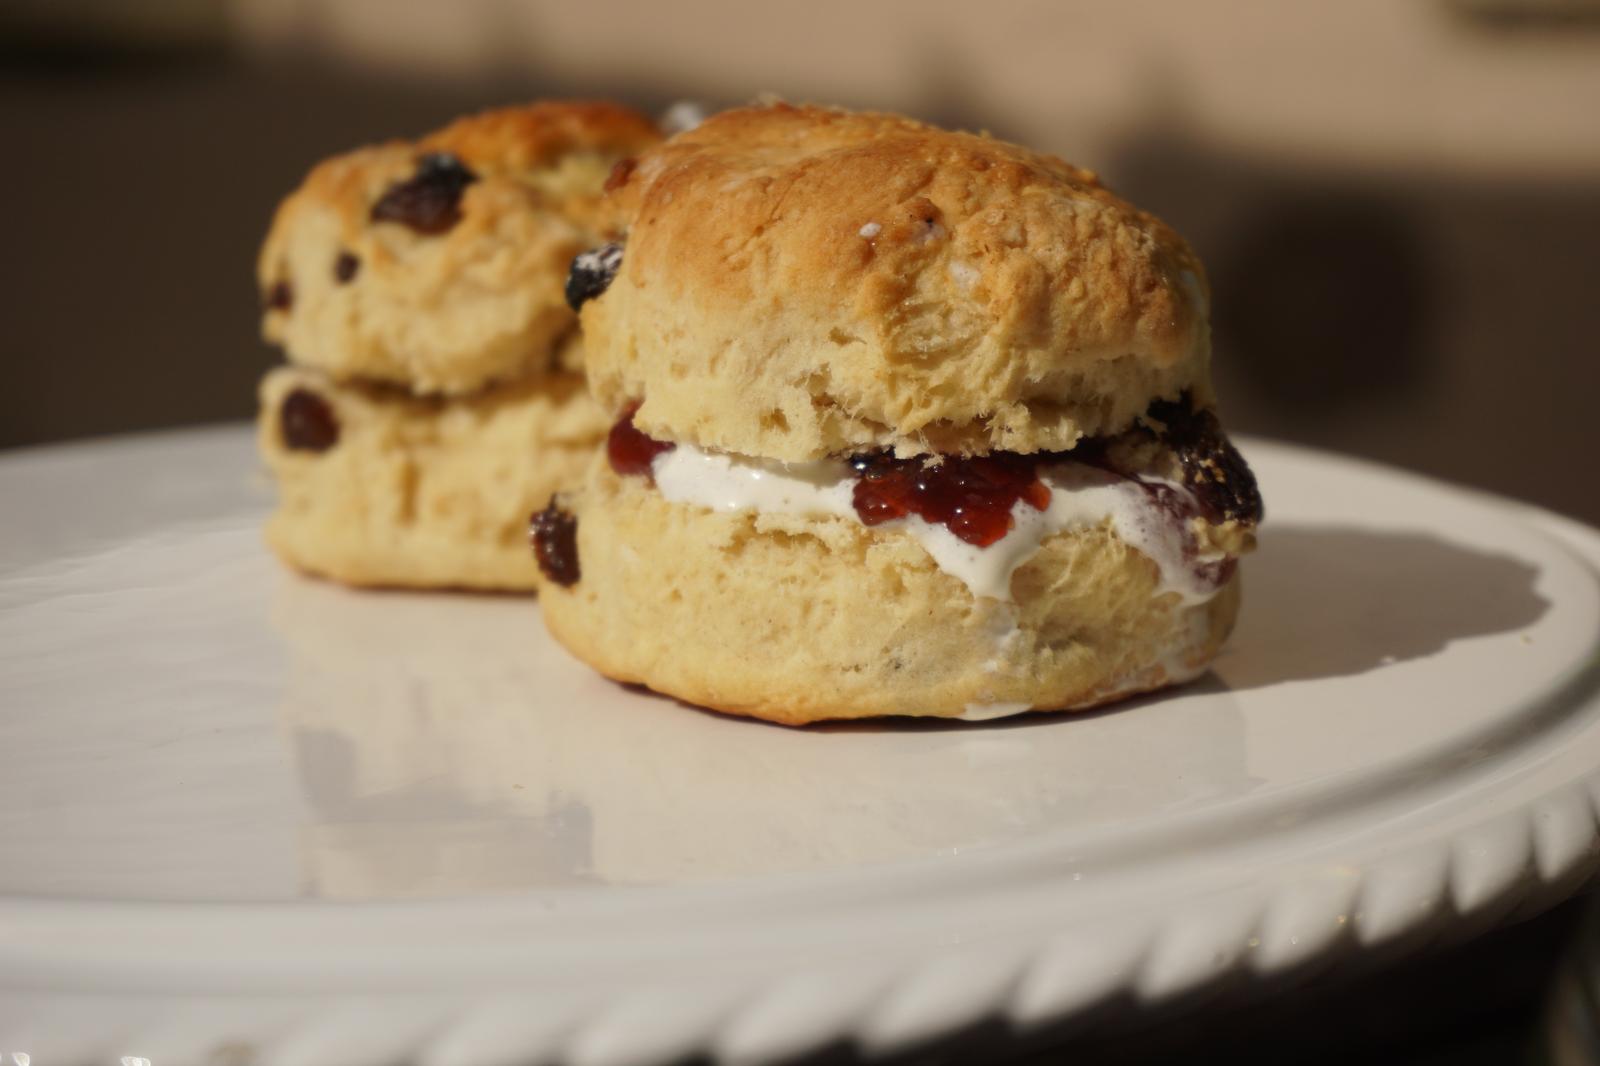 Plan a Trip to London If You Want to Know When You’ll Meet Your Soulmate ❤️ Scones